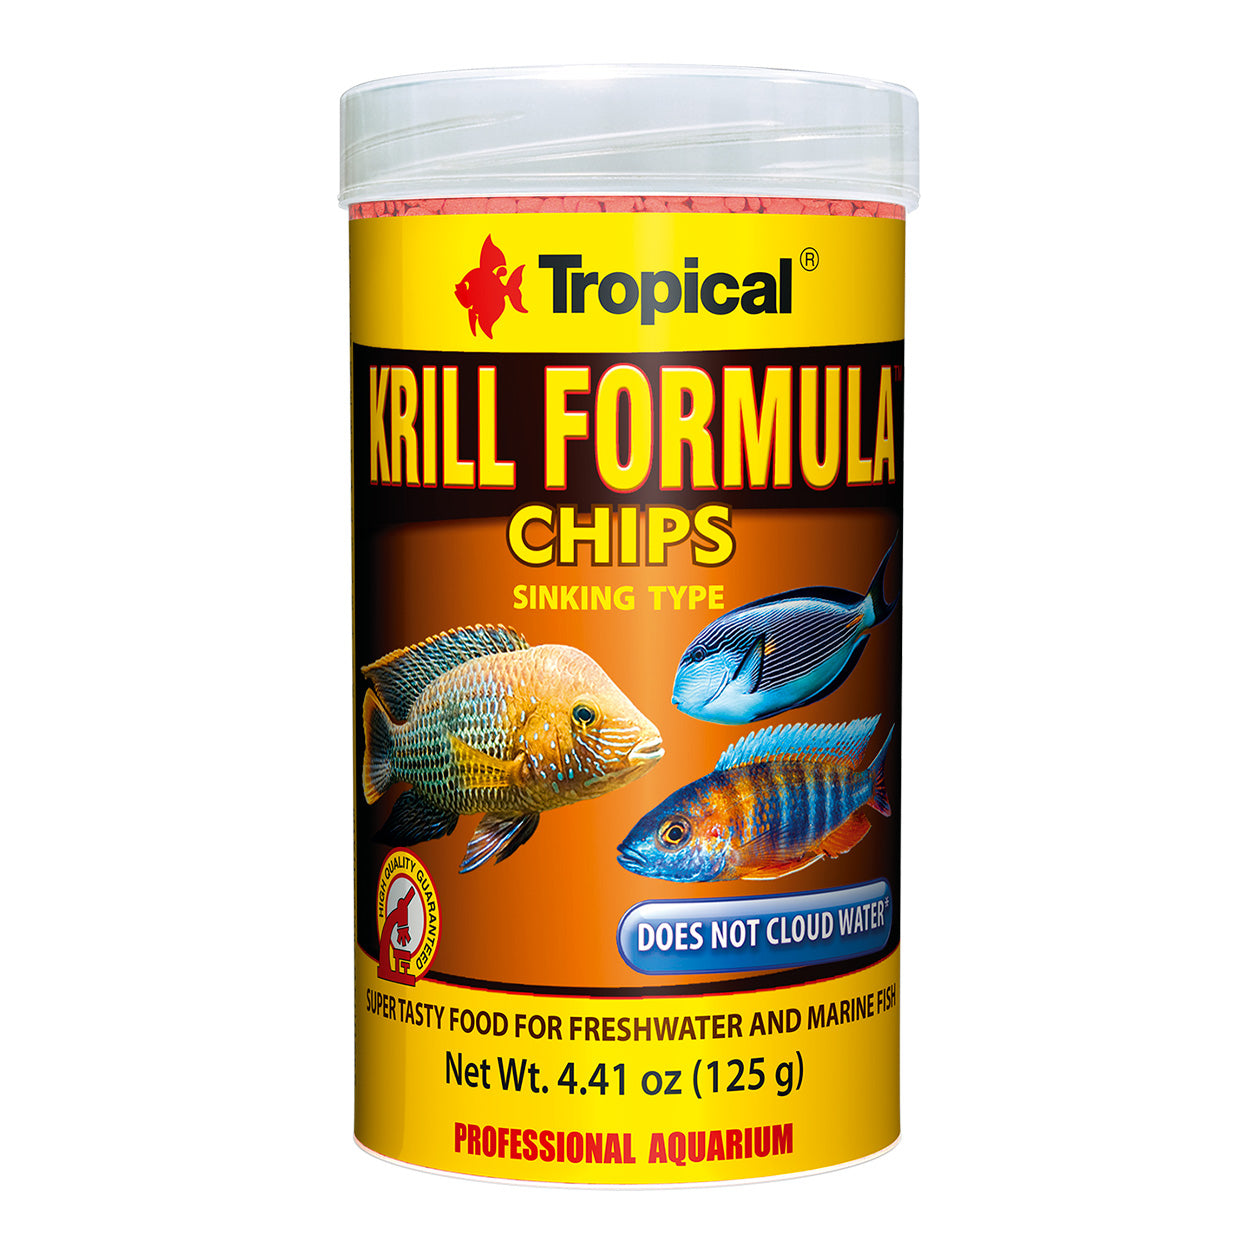 Tropical Krill Formula Chips